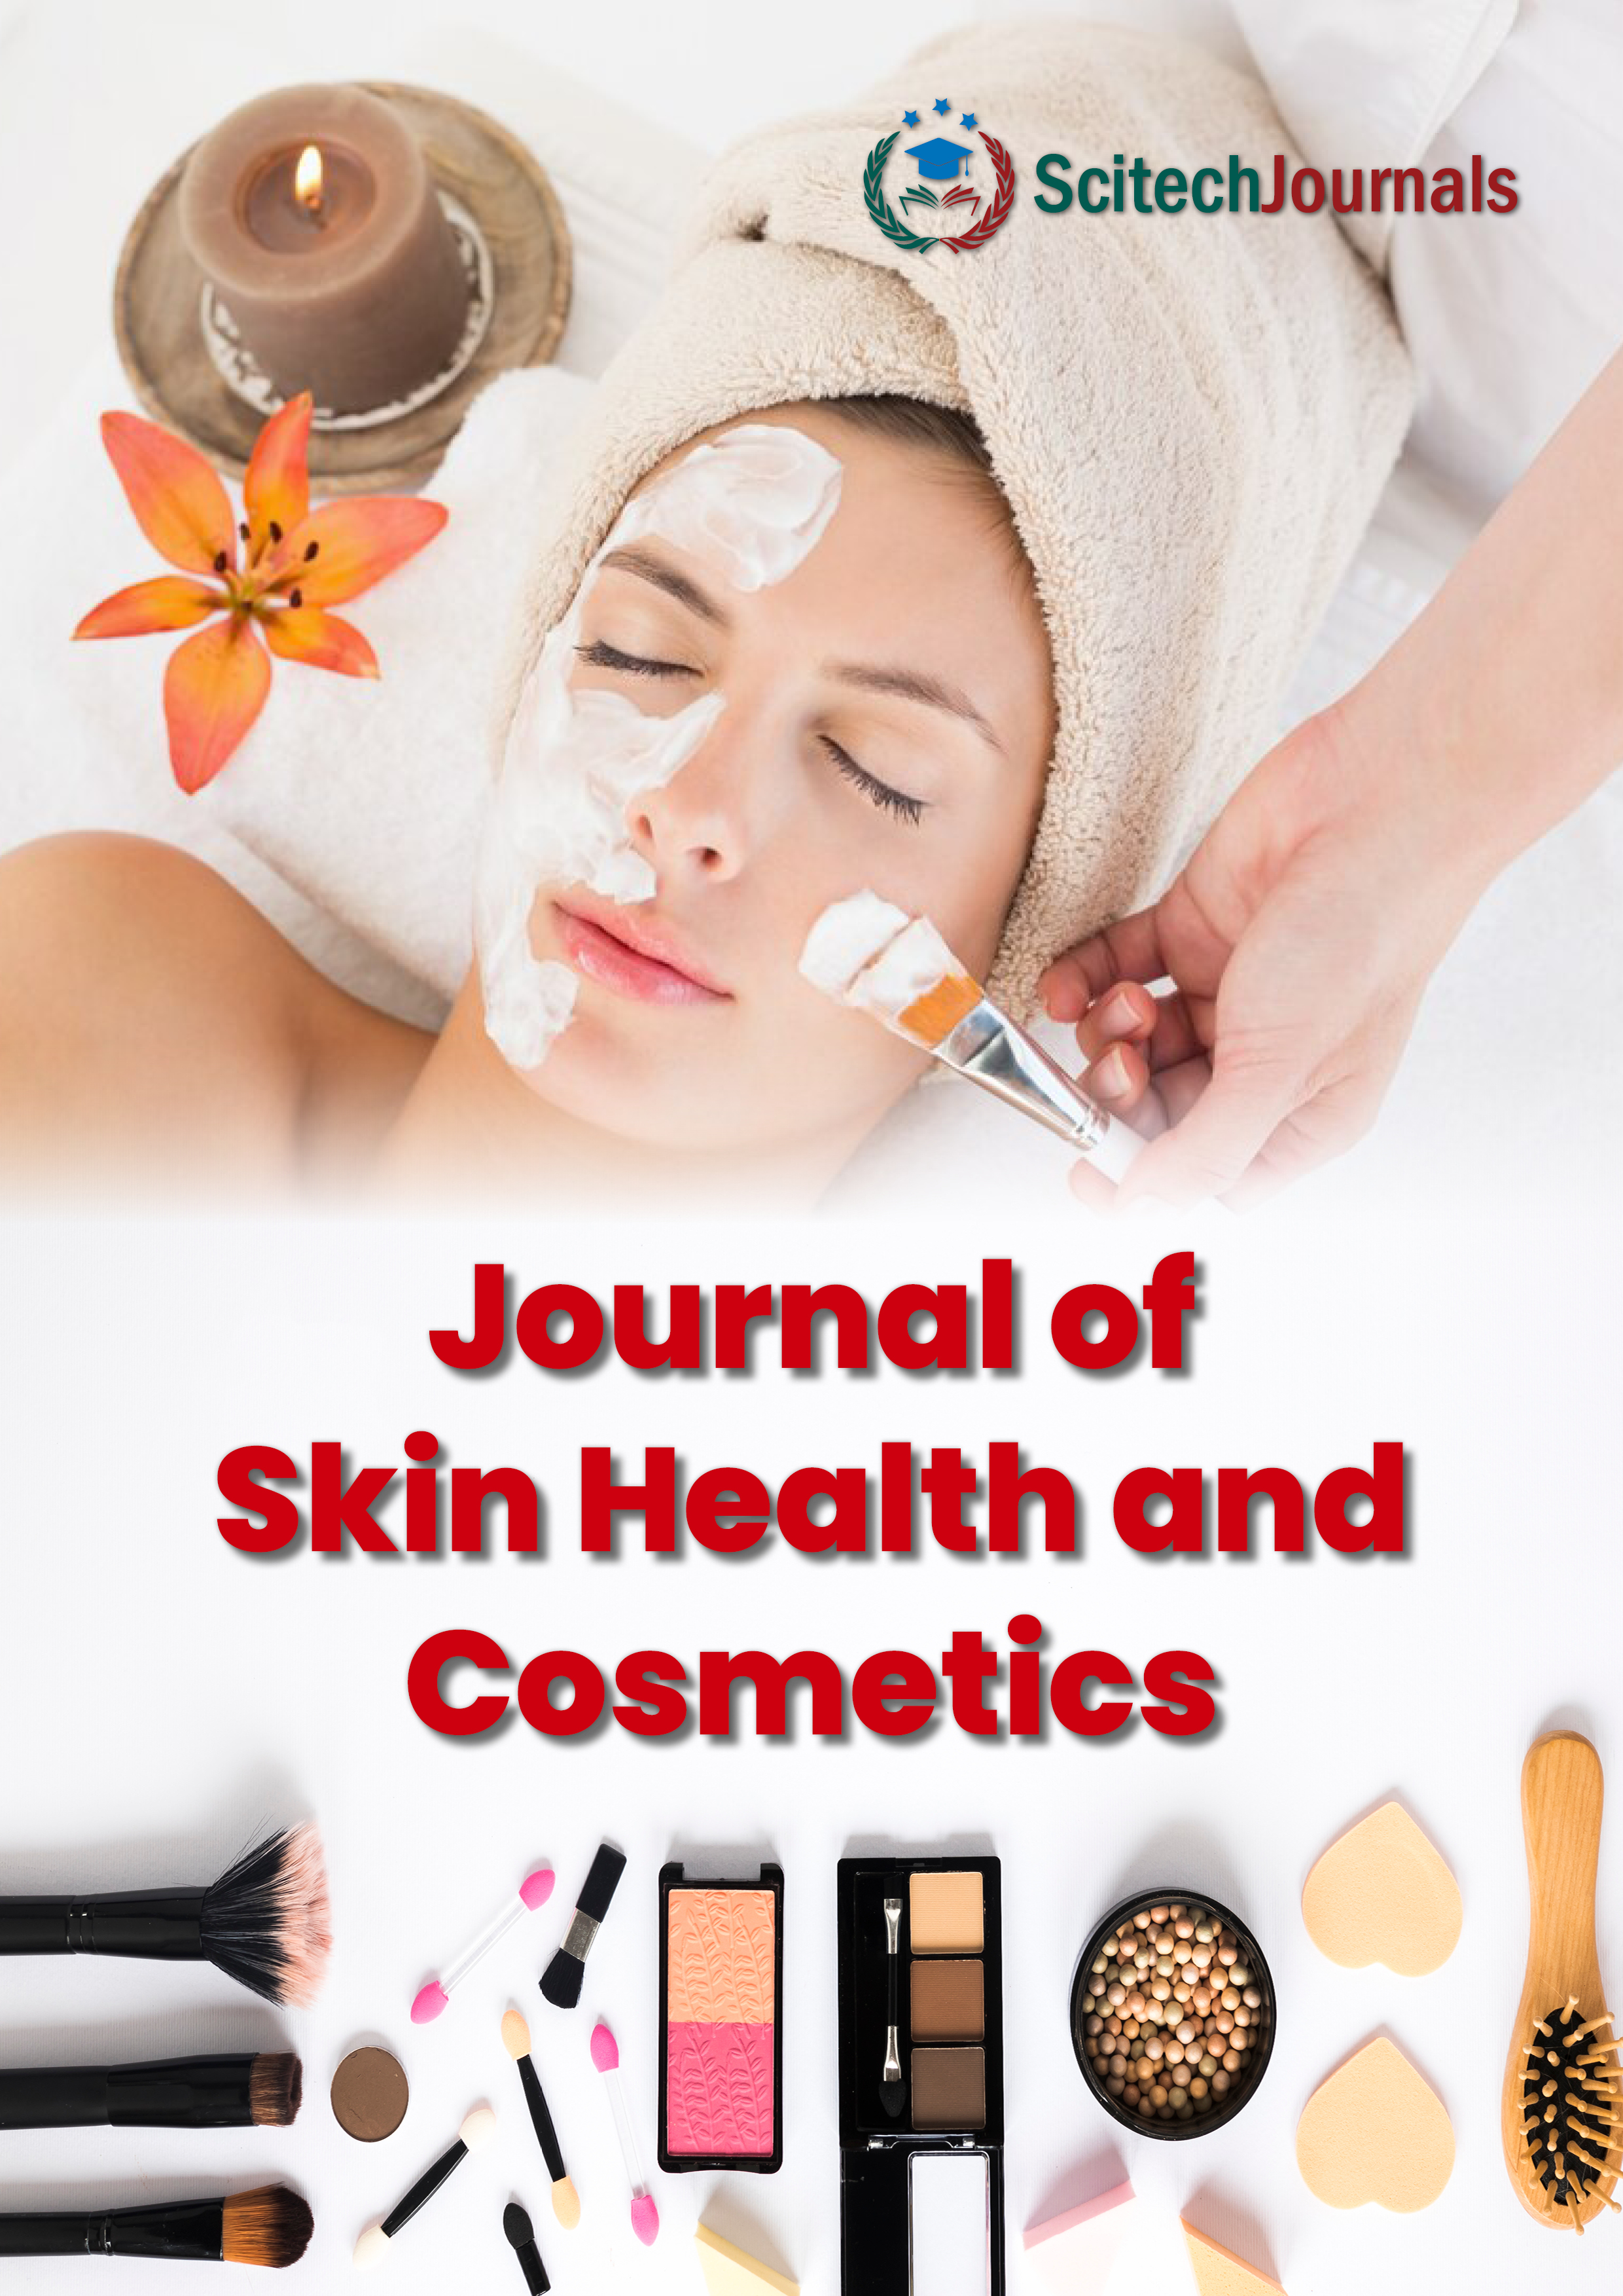 Journal of Skin Health and Cosmetics